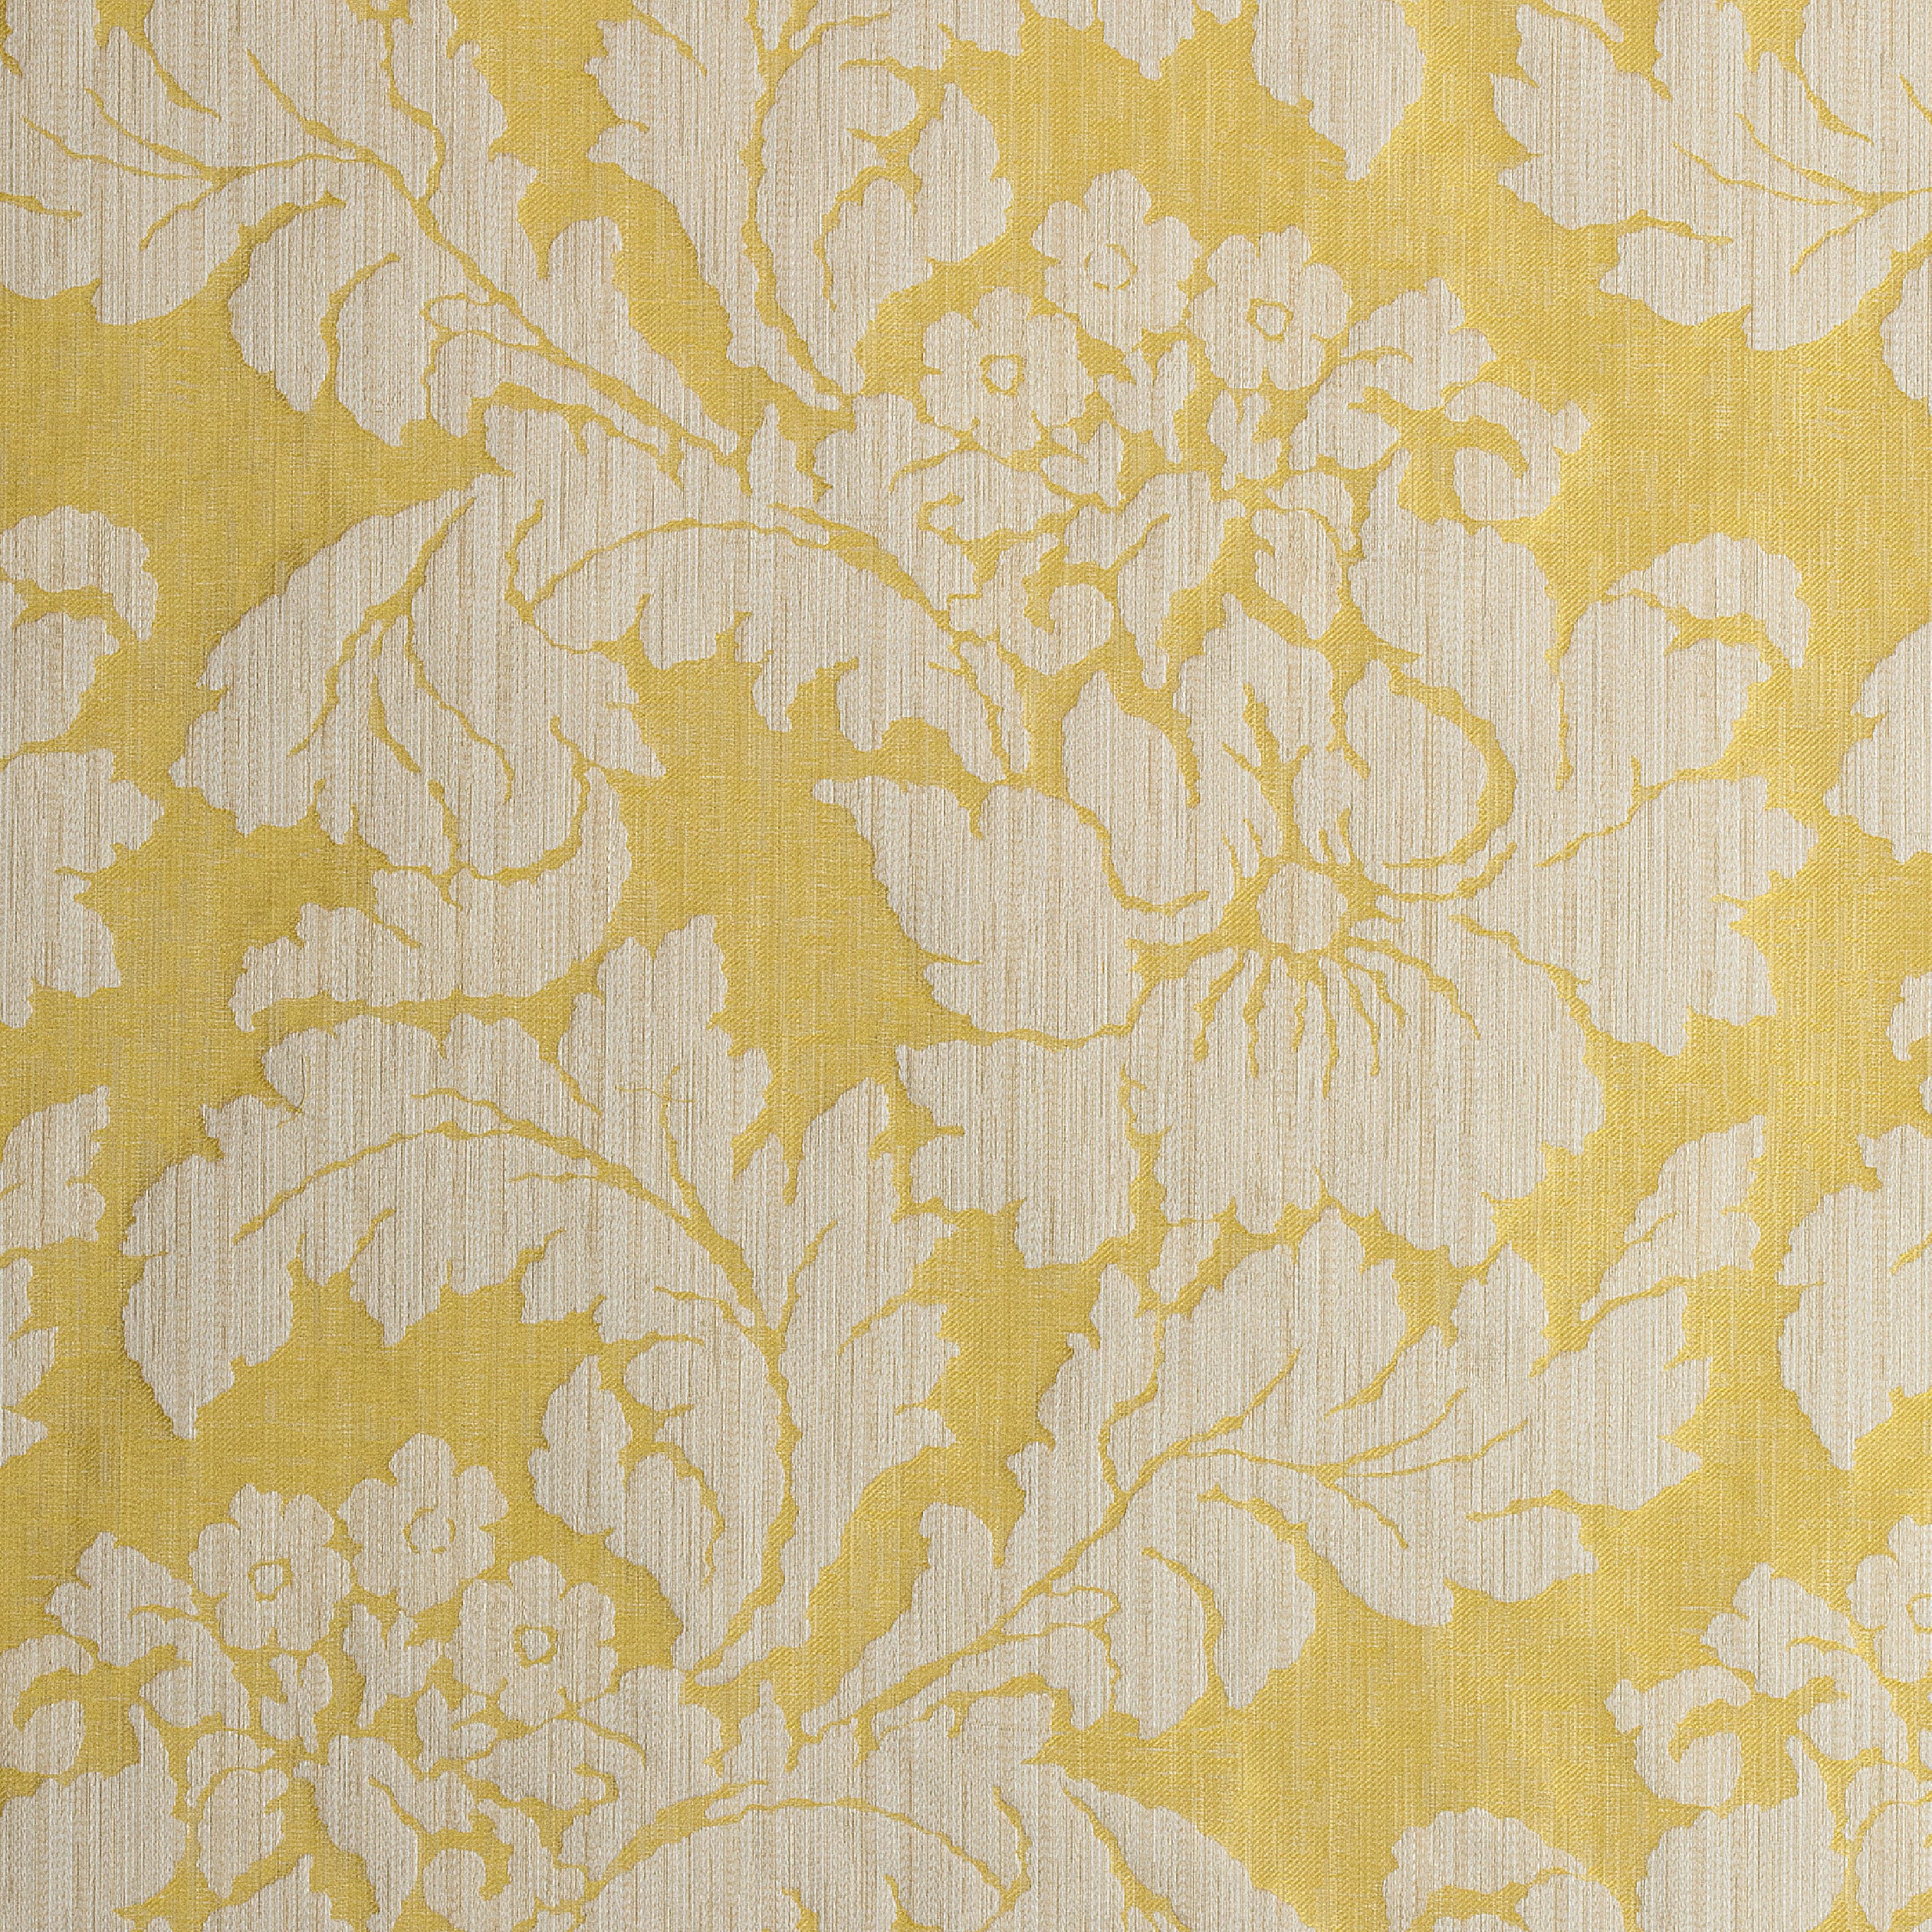 Caserta Damask fabric in yellow color - pattern number AW72981 - by Anna French in the Manor collection